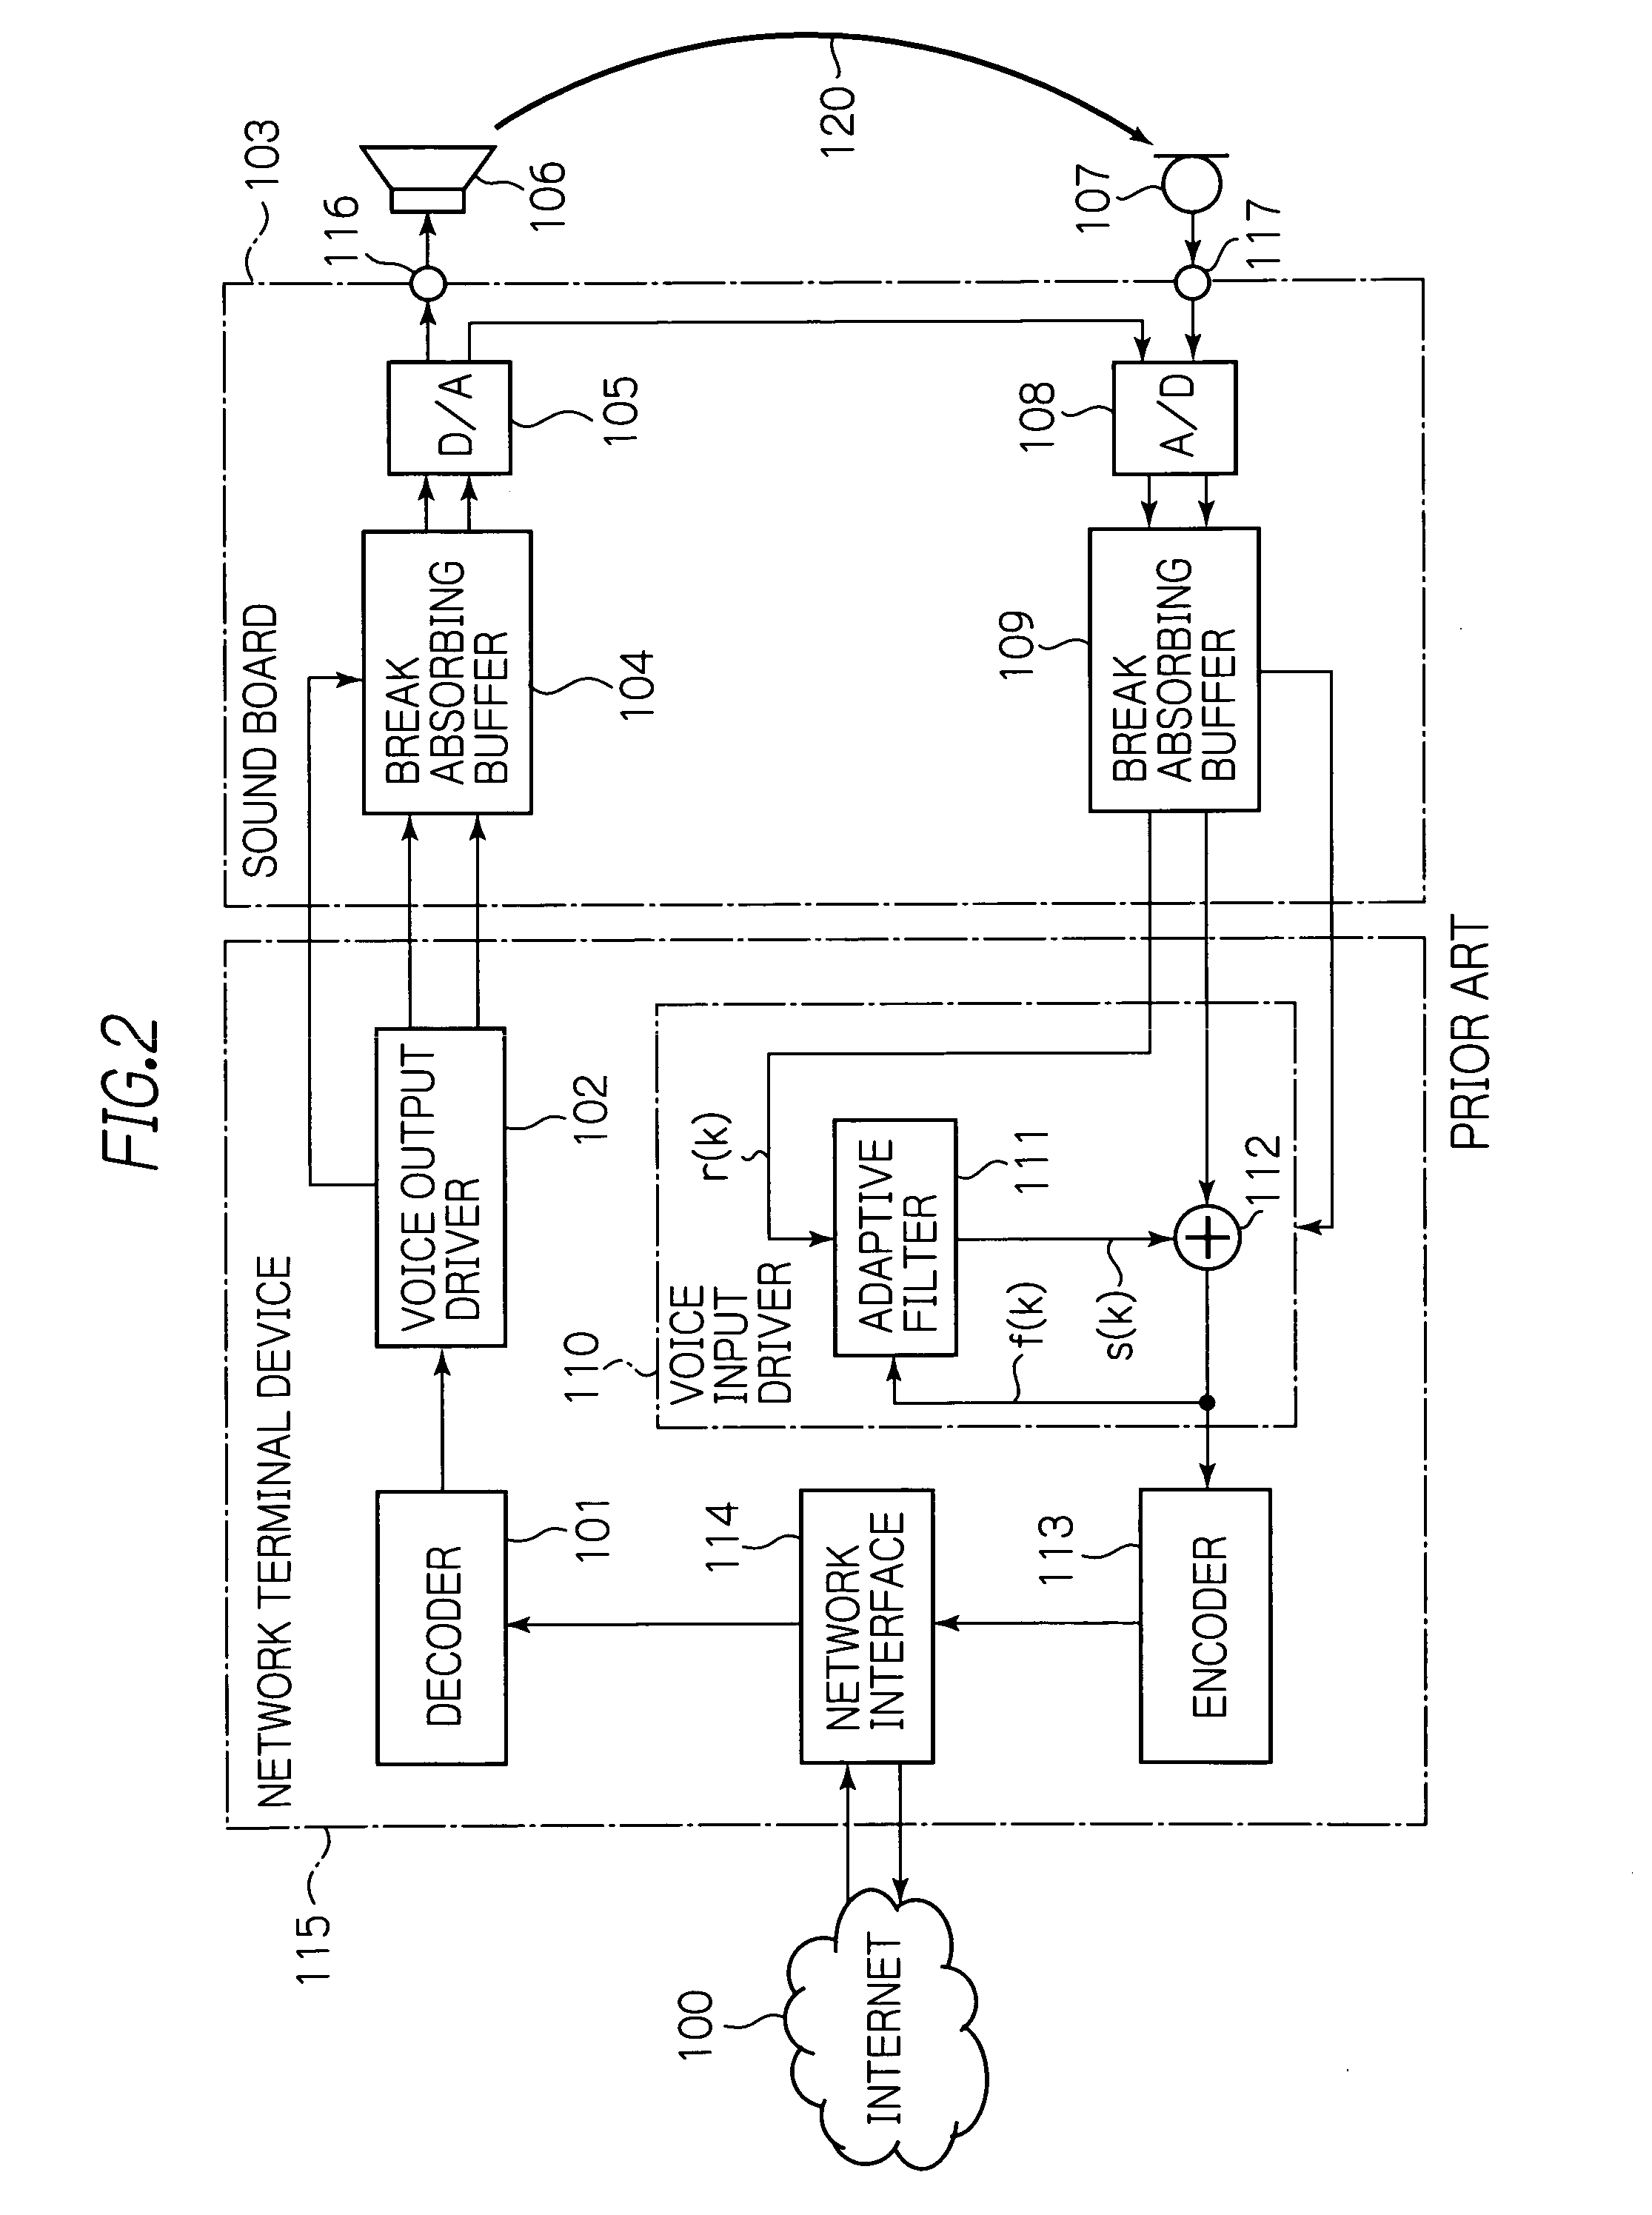 Echo canceller canceling an echo according to timings of producing and detecting an identified frequency component signal